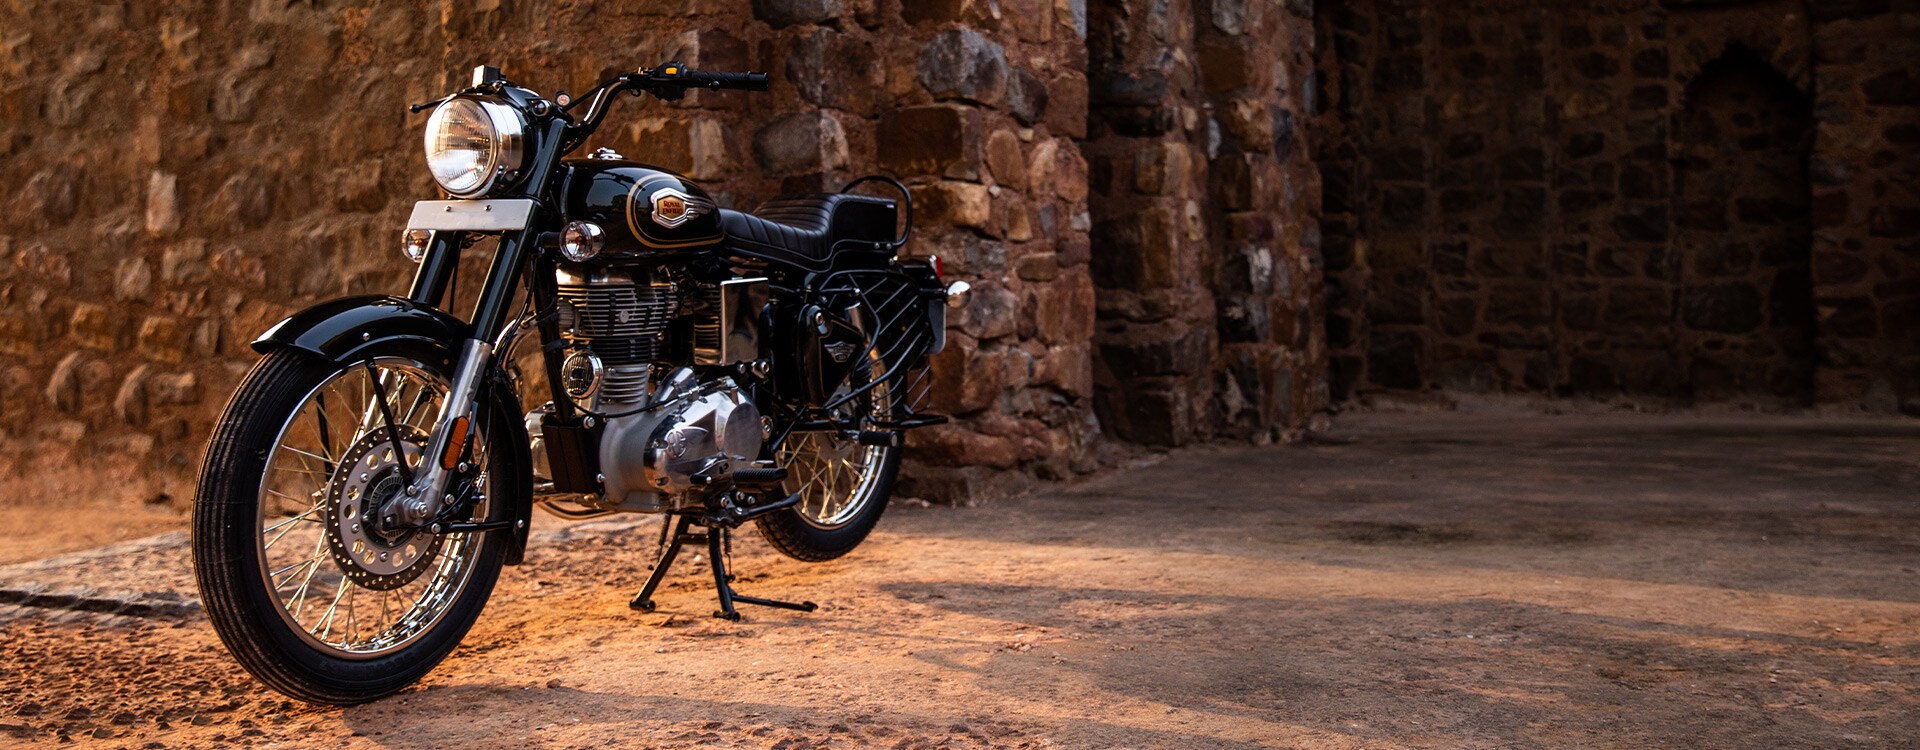 RE Bullet 350 Price, Colours, Images & Mileage in India | Royal Enfield